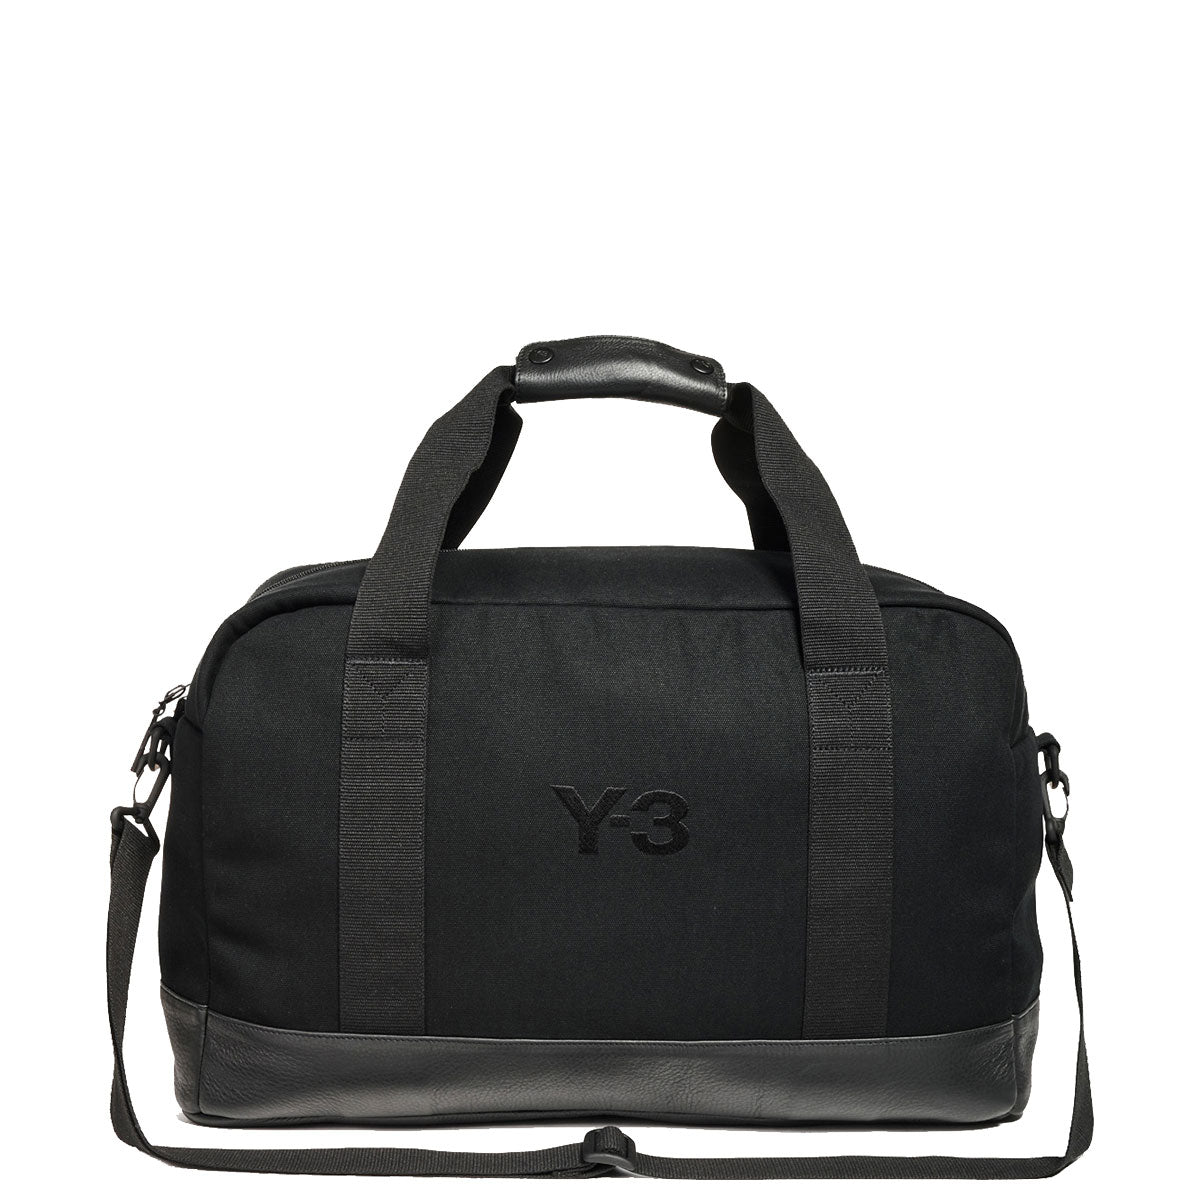 Y-3 CL WEEKENDER - Why are you here?